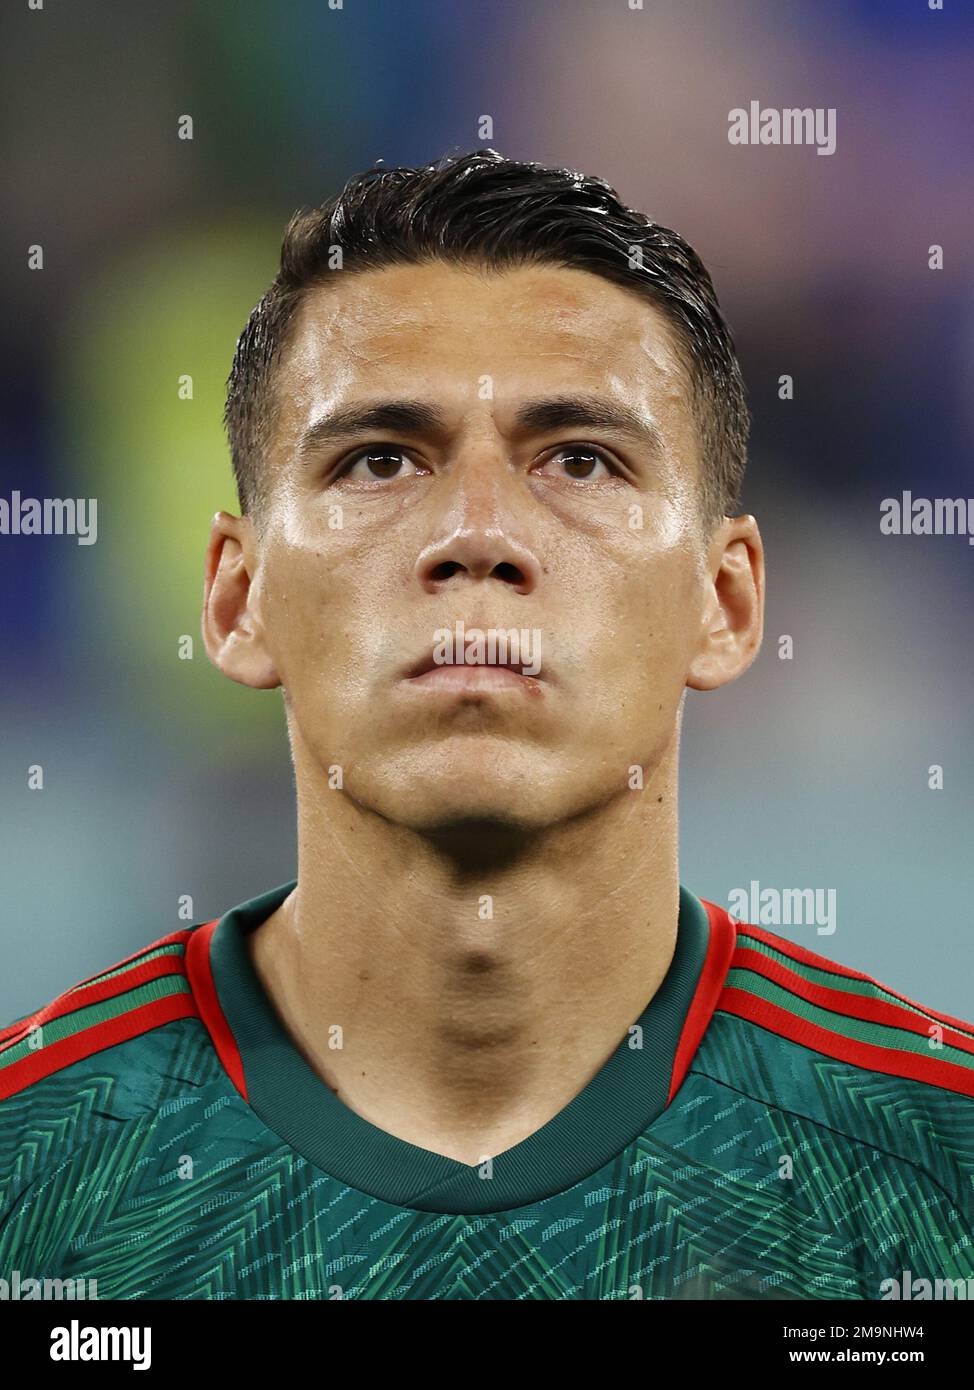 DOHA - Hector Moreno of Mexico during the FIFA World Cup Qatar 2022 group C match between Mexico and Poland at 974 Stadium on November 22, 2022 in Doha, Qatar. AP | Dutch Height | MAURICE OF STONE Stock Photo